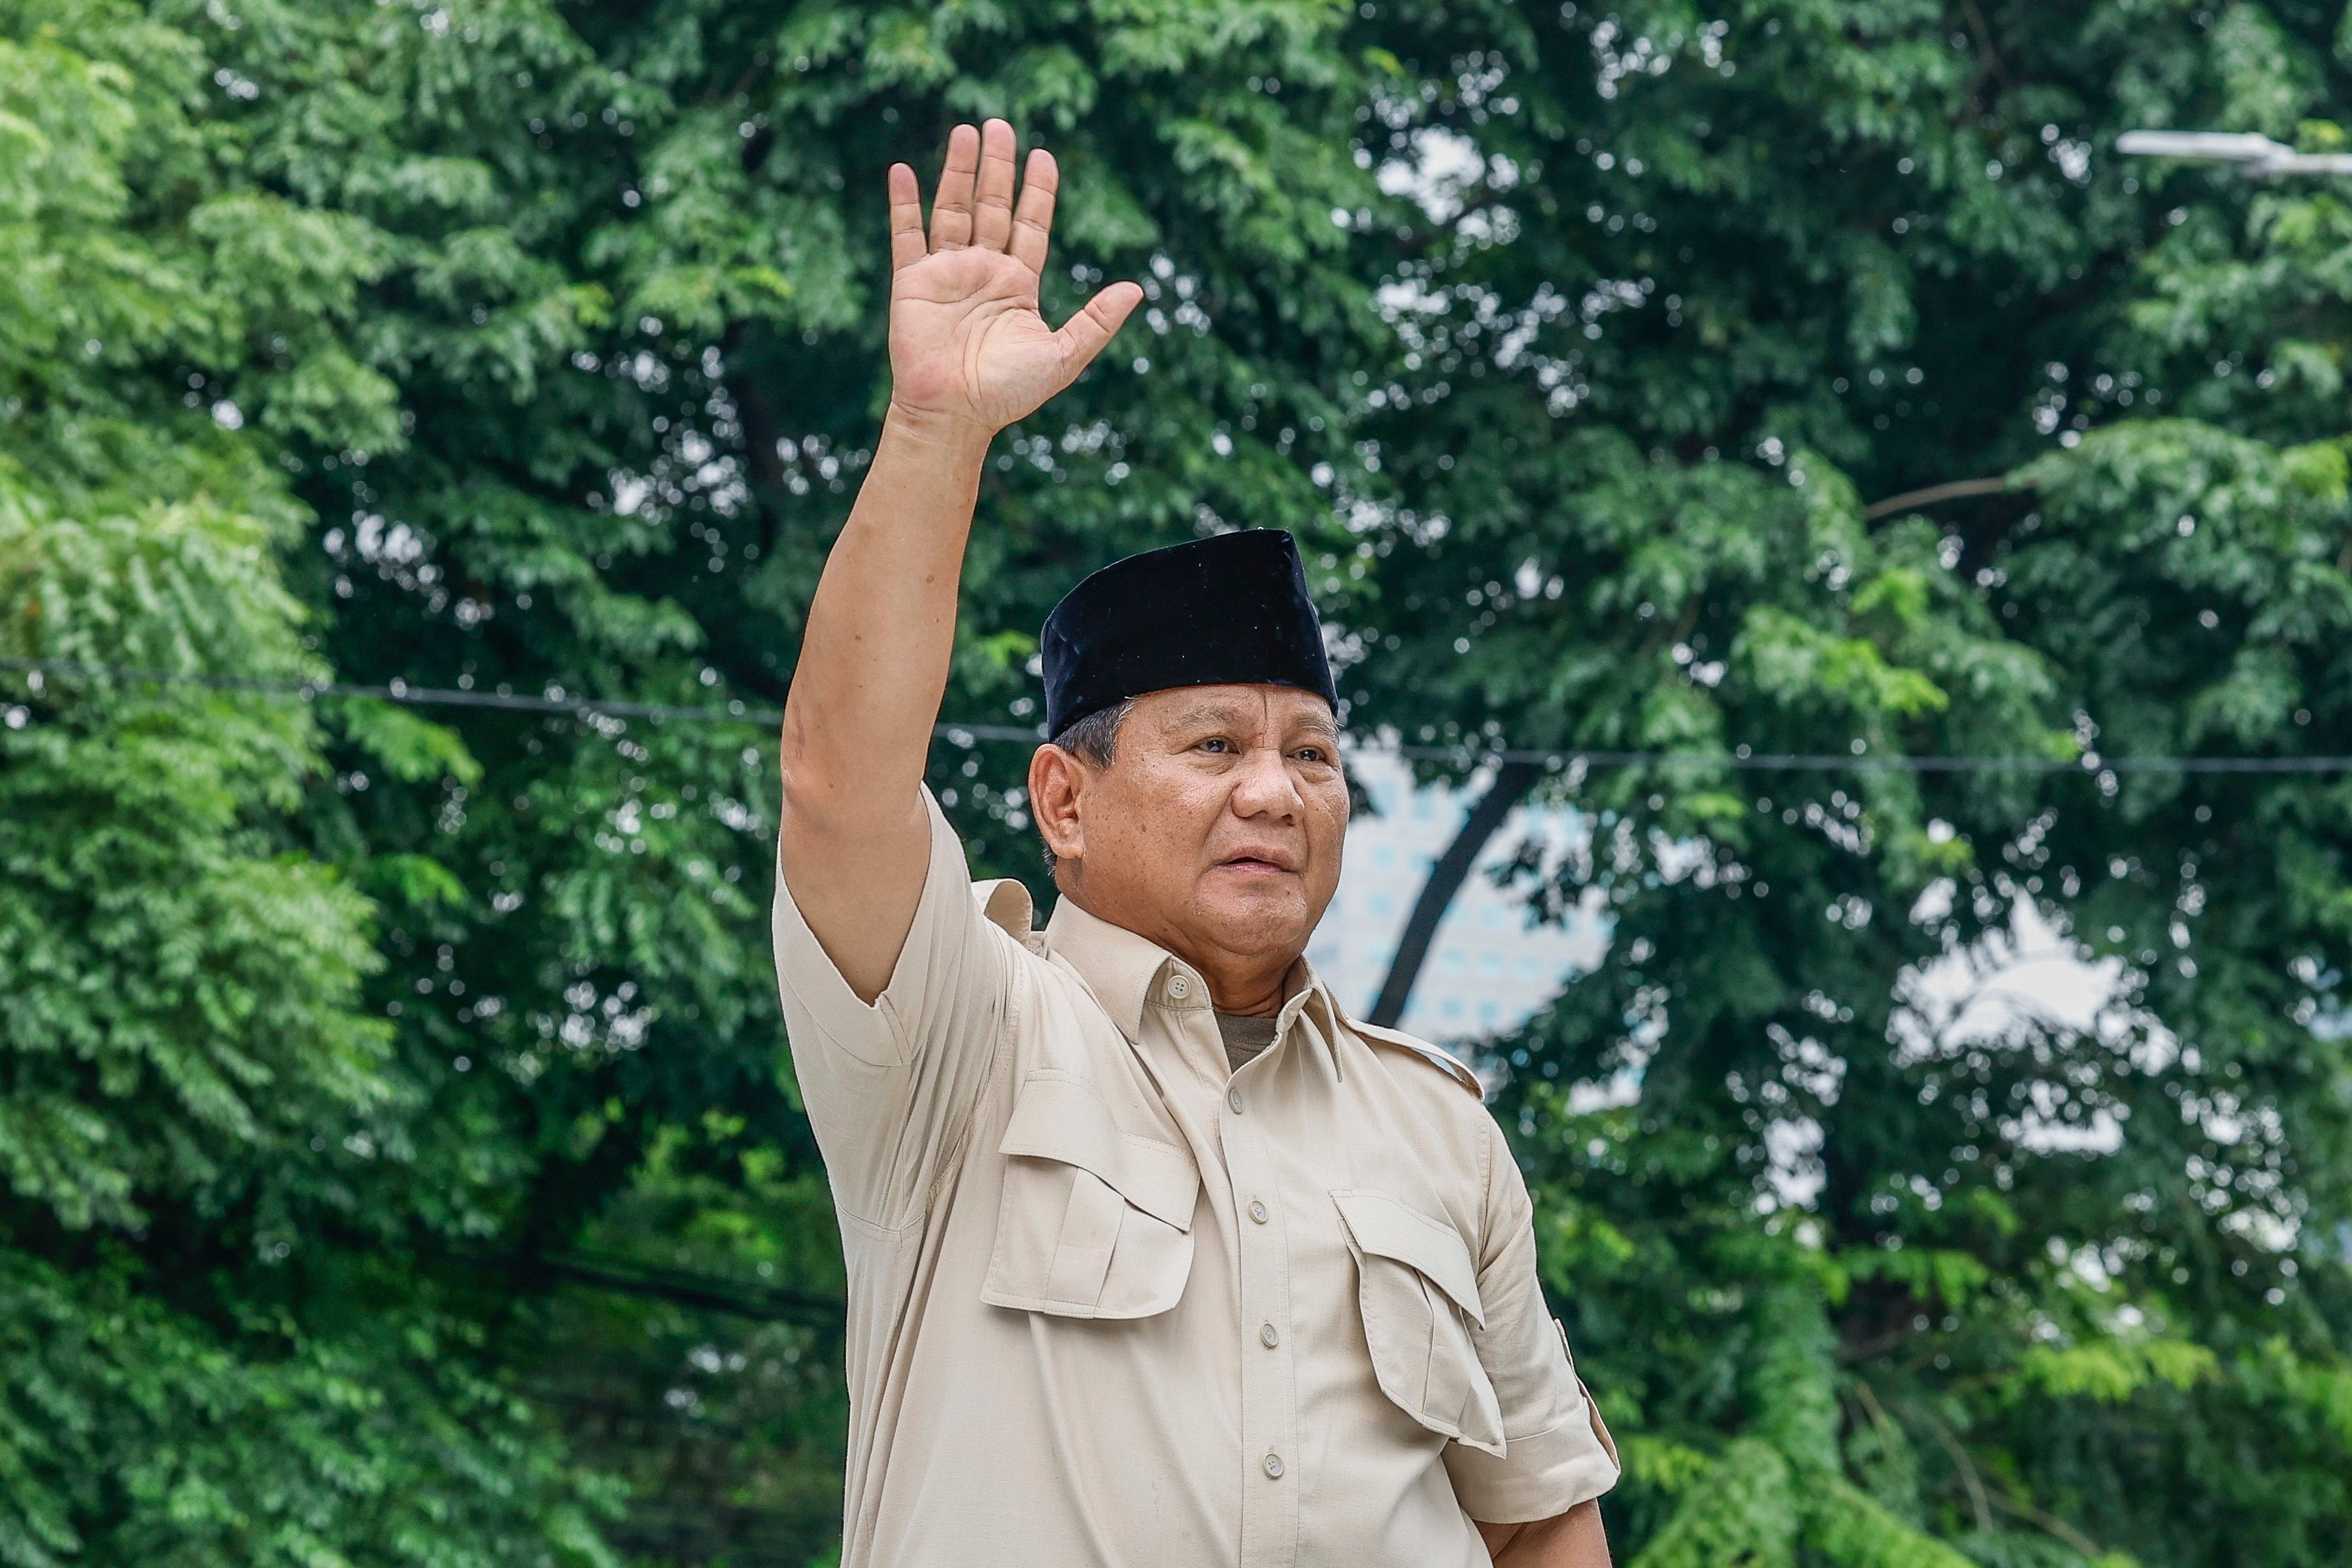 Analysts are curious how Indonesia’s foreign policy towards China will differ under Prabowo Subianto’s rule. Photo: EPA-EFE